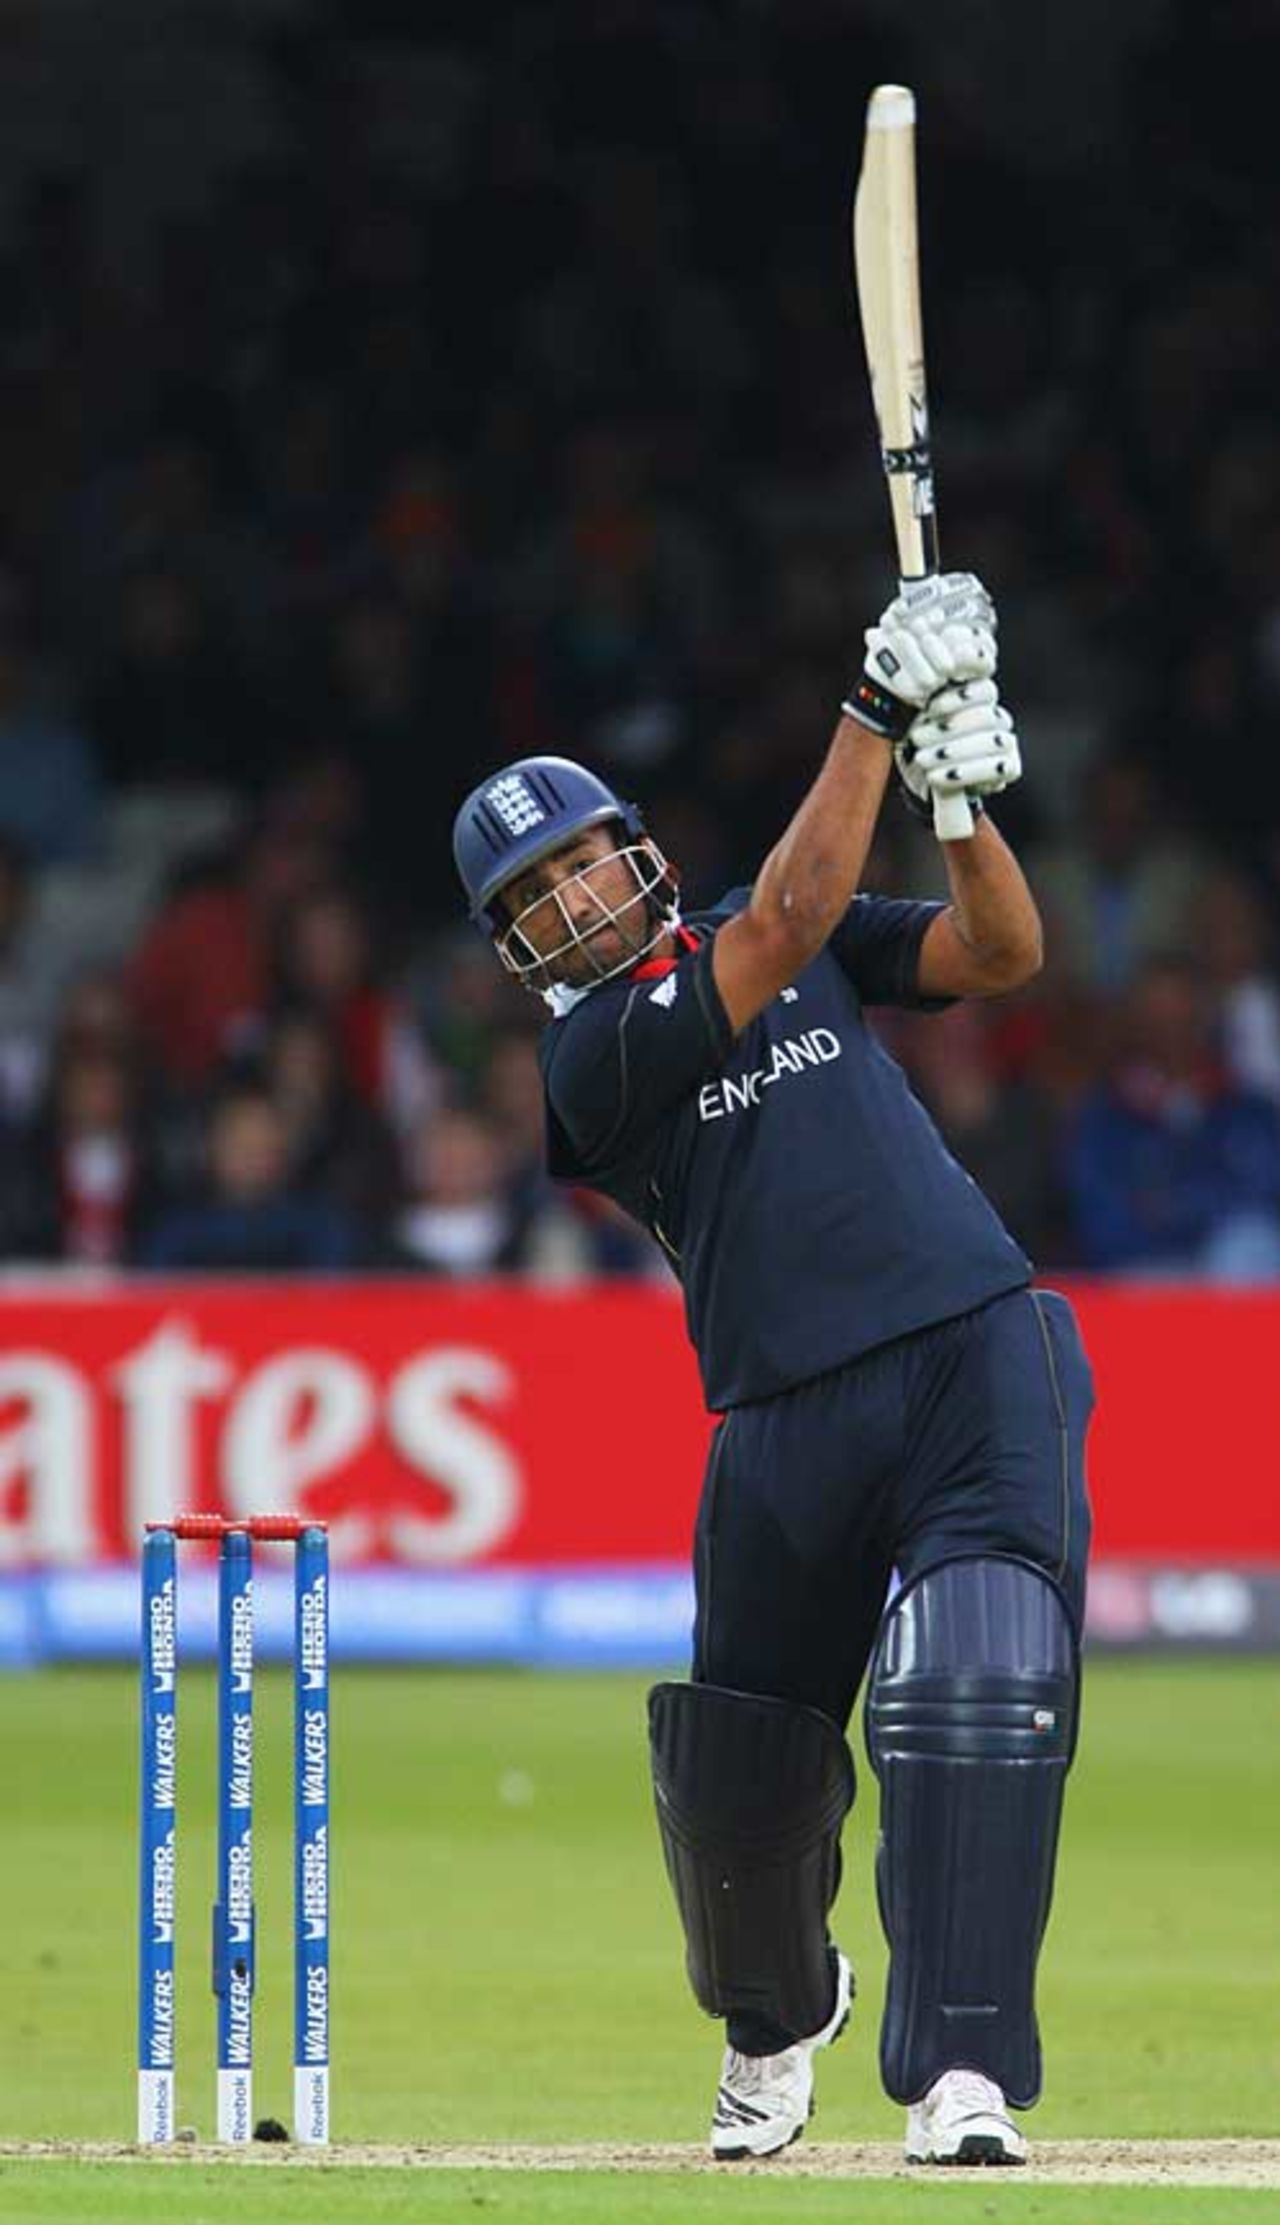 Ravi Bopara goes down the ground during a positive innings, England v Netherlands, ICC World Twenty20, Lord's, June 5, 2009